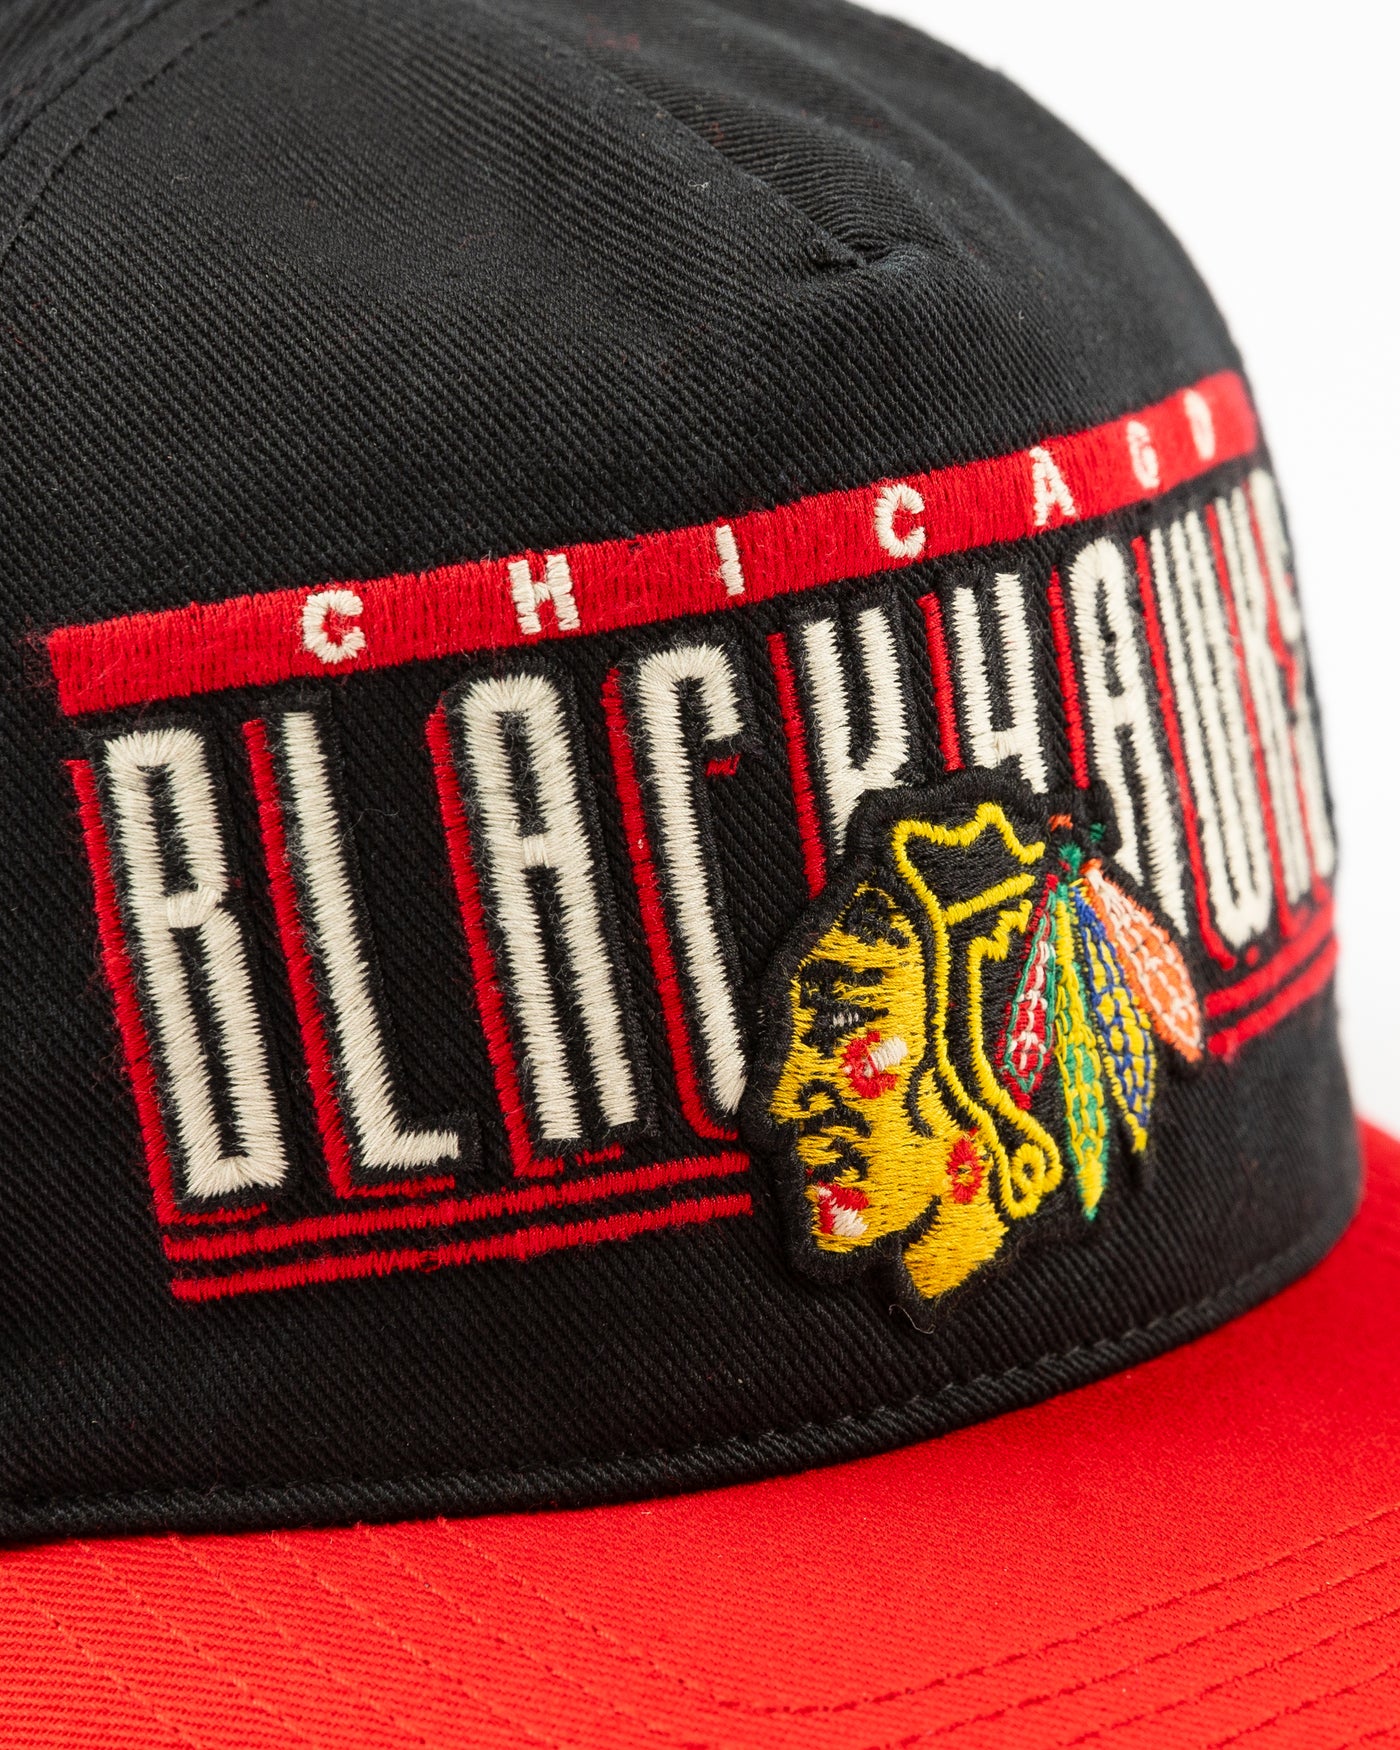 black and red '47 brand snapback hat with Chicago Blackhawks wordmark and primary logo embroidered on the front - detail lay flat